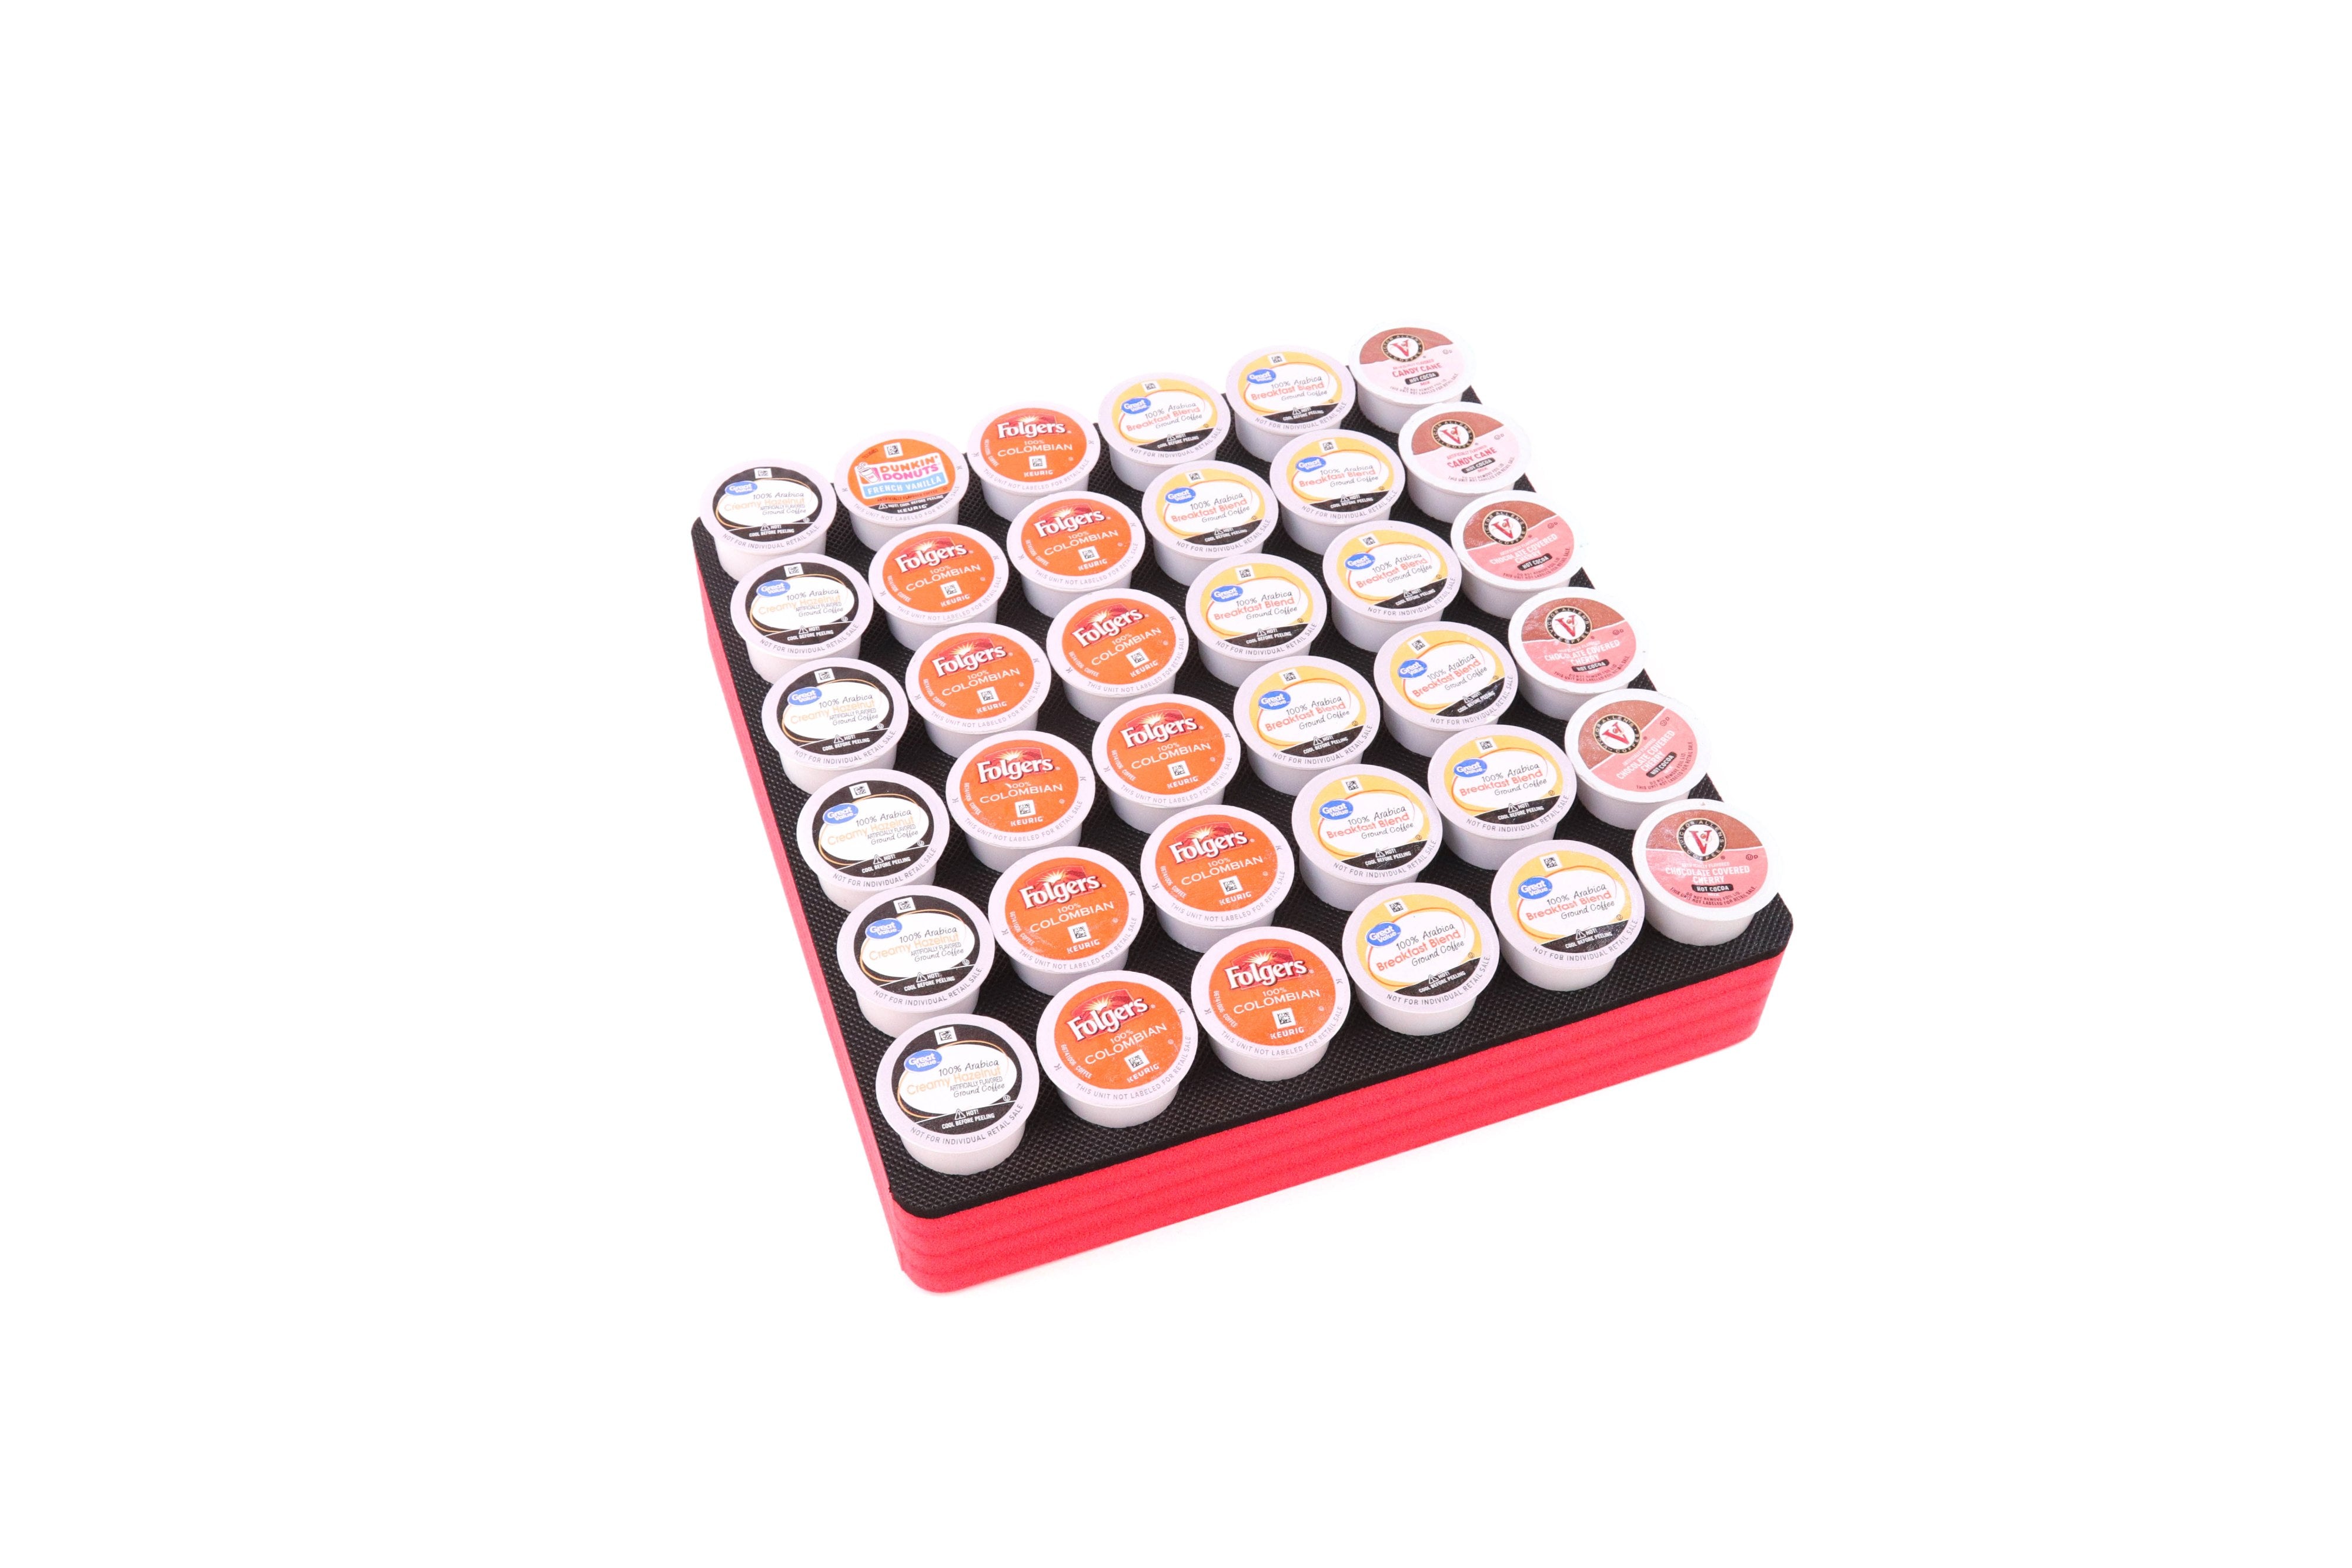 Coffee Red and Black Pod Storage Deluxe Organizer Tray Drawer Insert Washable 12.5 X 12.5 Inches Holds 36 Compatible with Keurig K-Cup